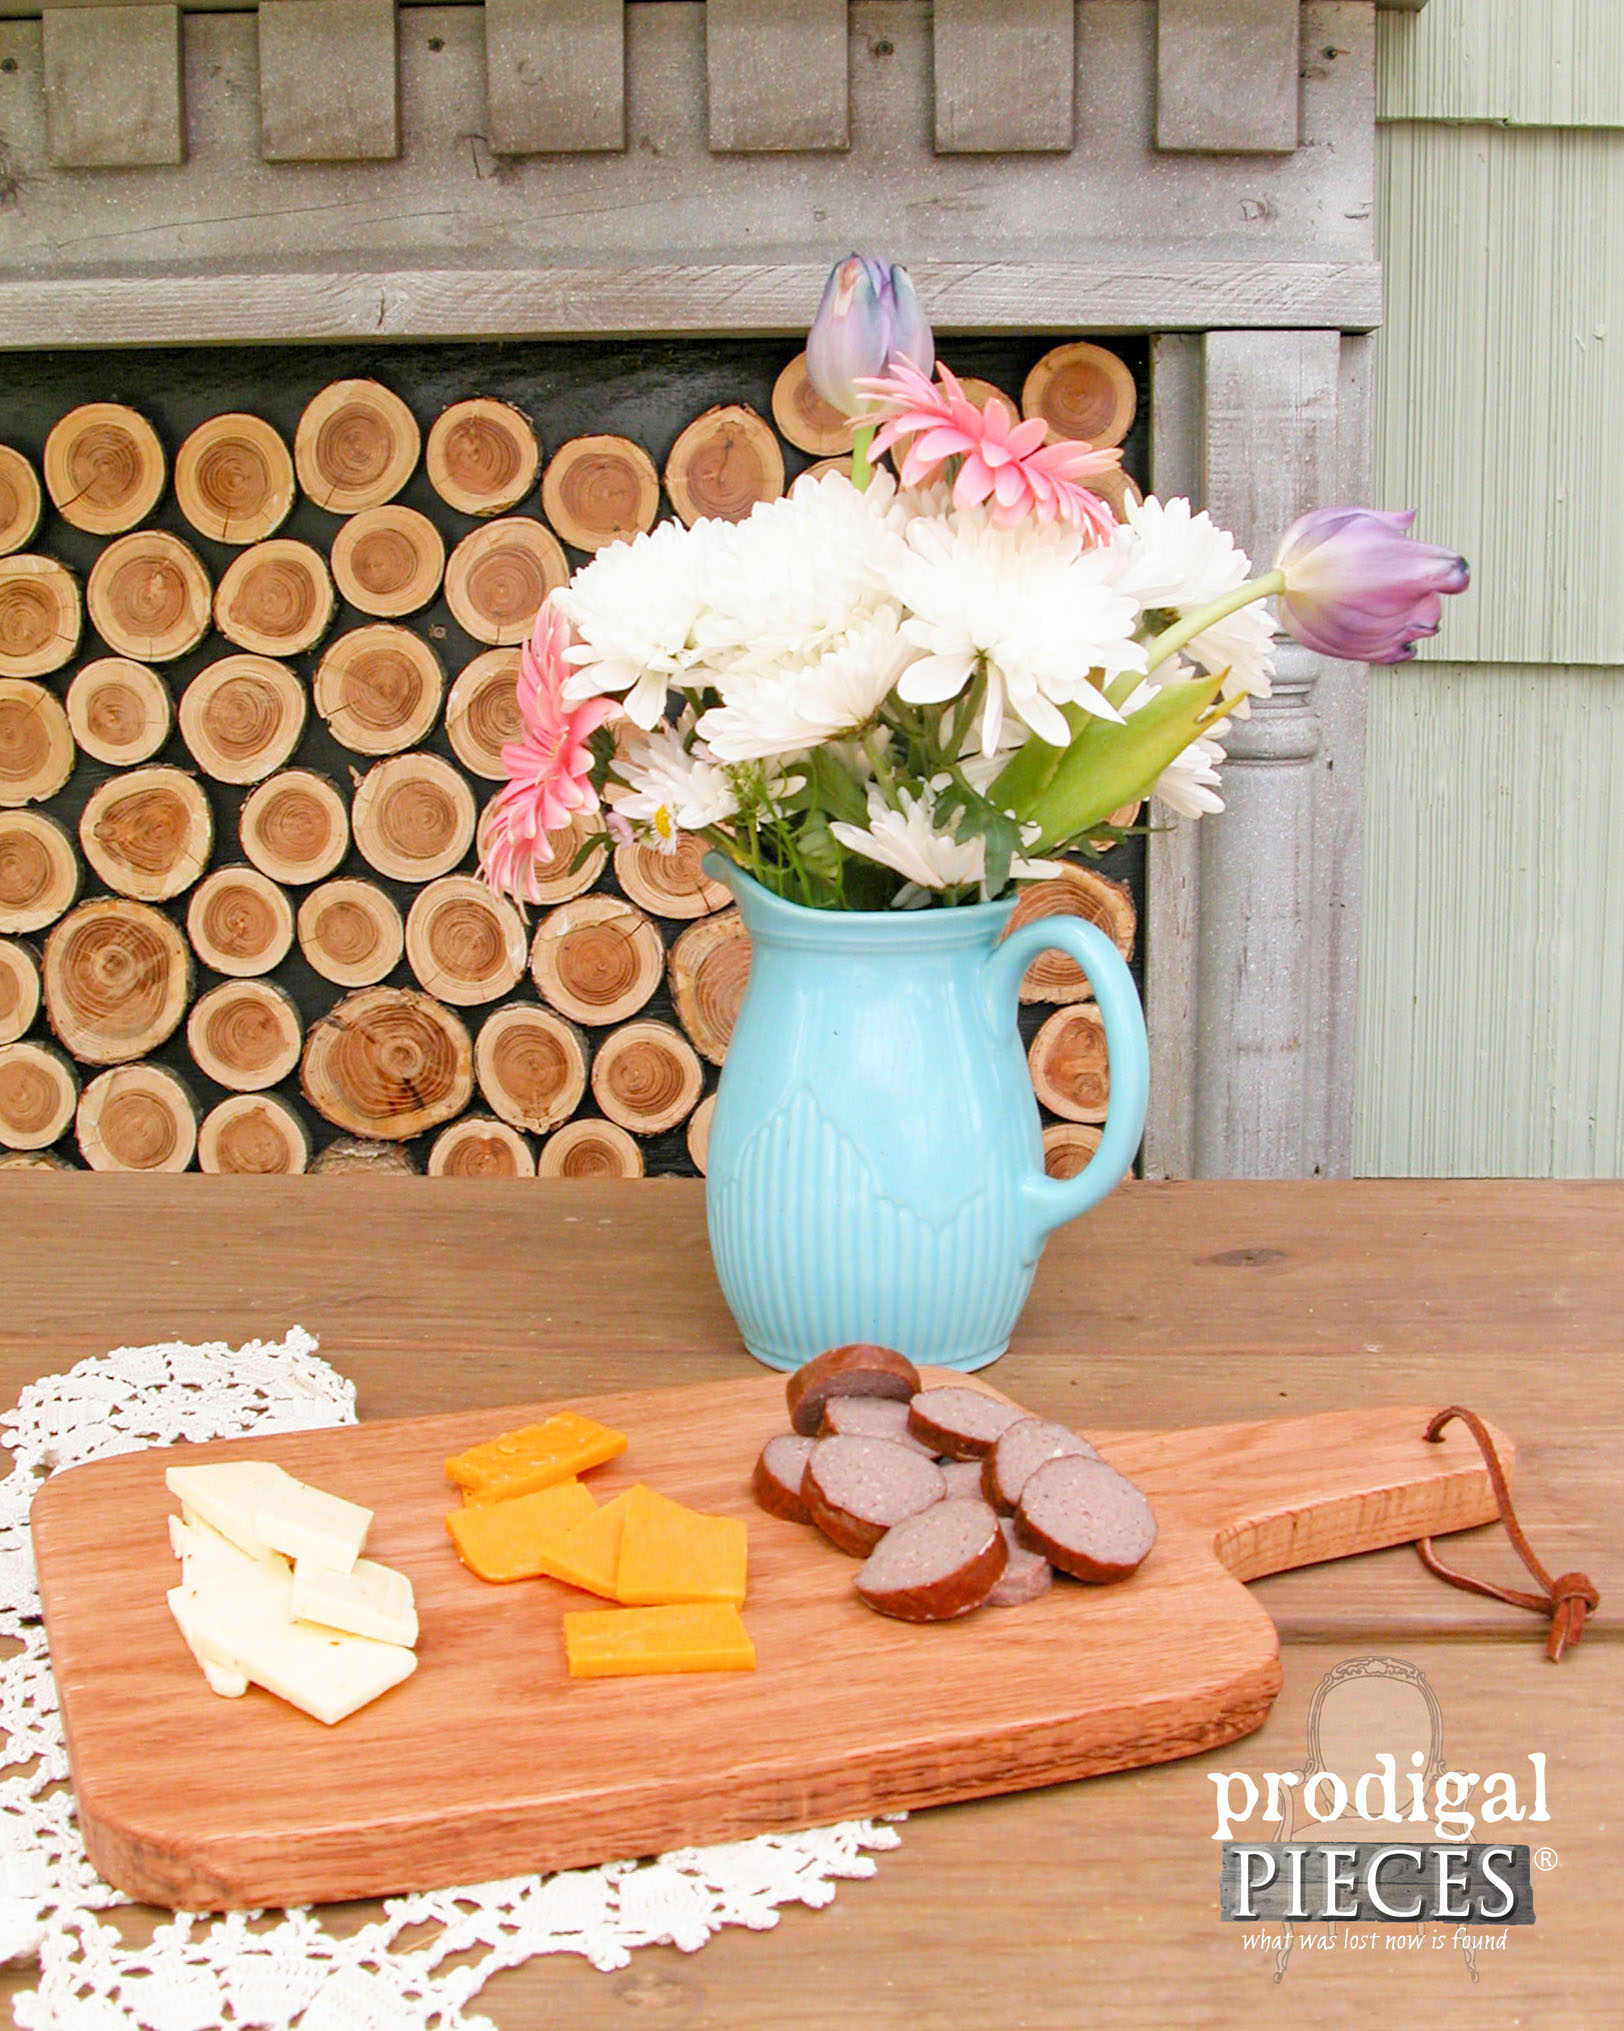 Create Your Own Farmhouse Cutting Board with this Tutorial by Prodigal Pieces | www.prodigalpieces.com